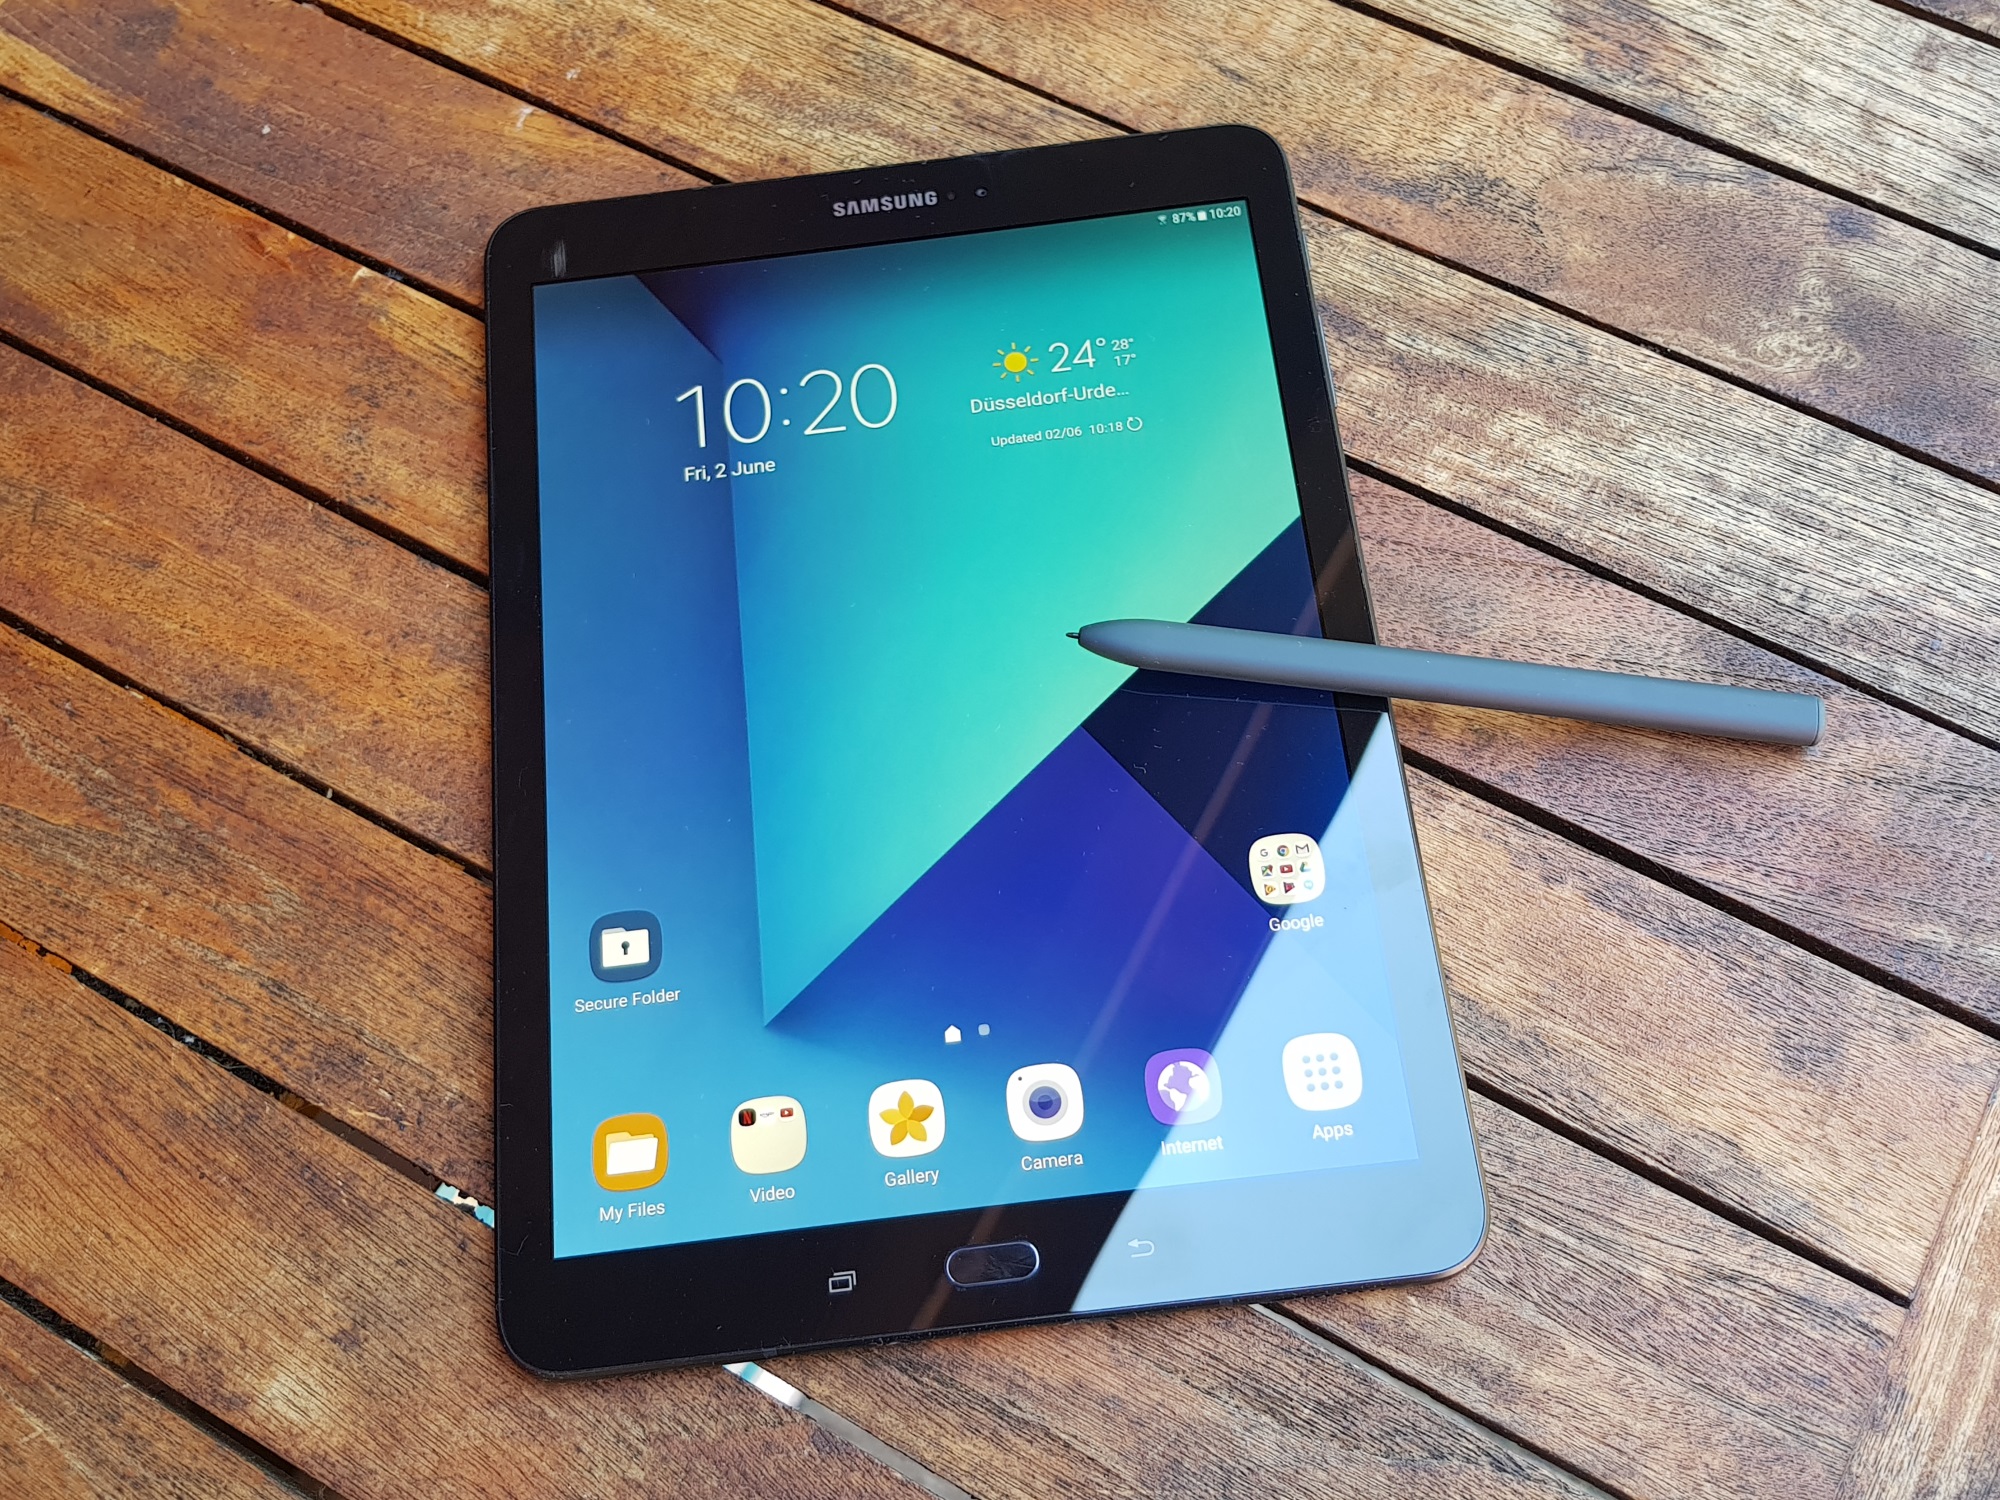 Galaxy Tab S3 gets Android Pie with October security patch in some markets  - SamMobile